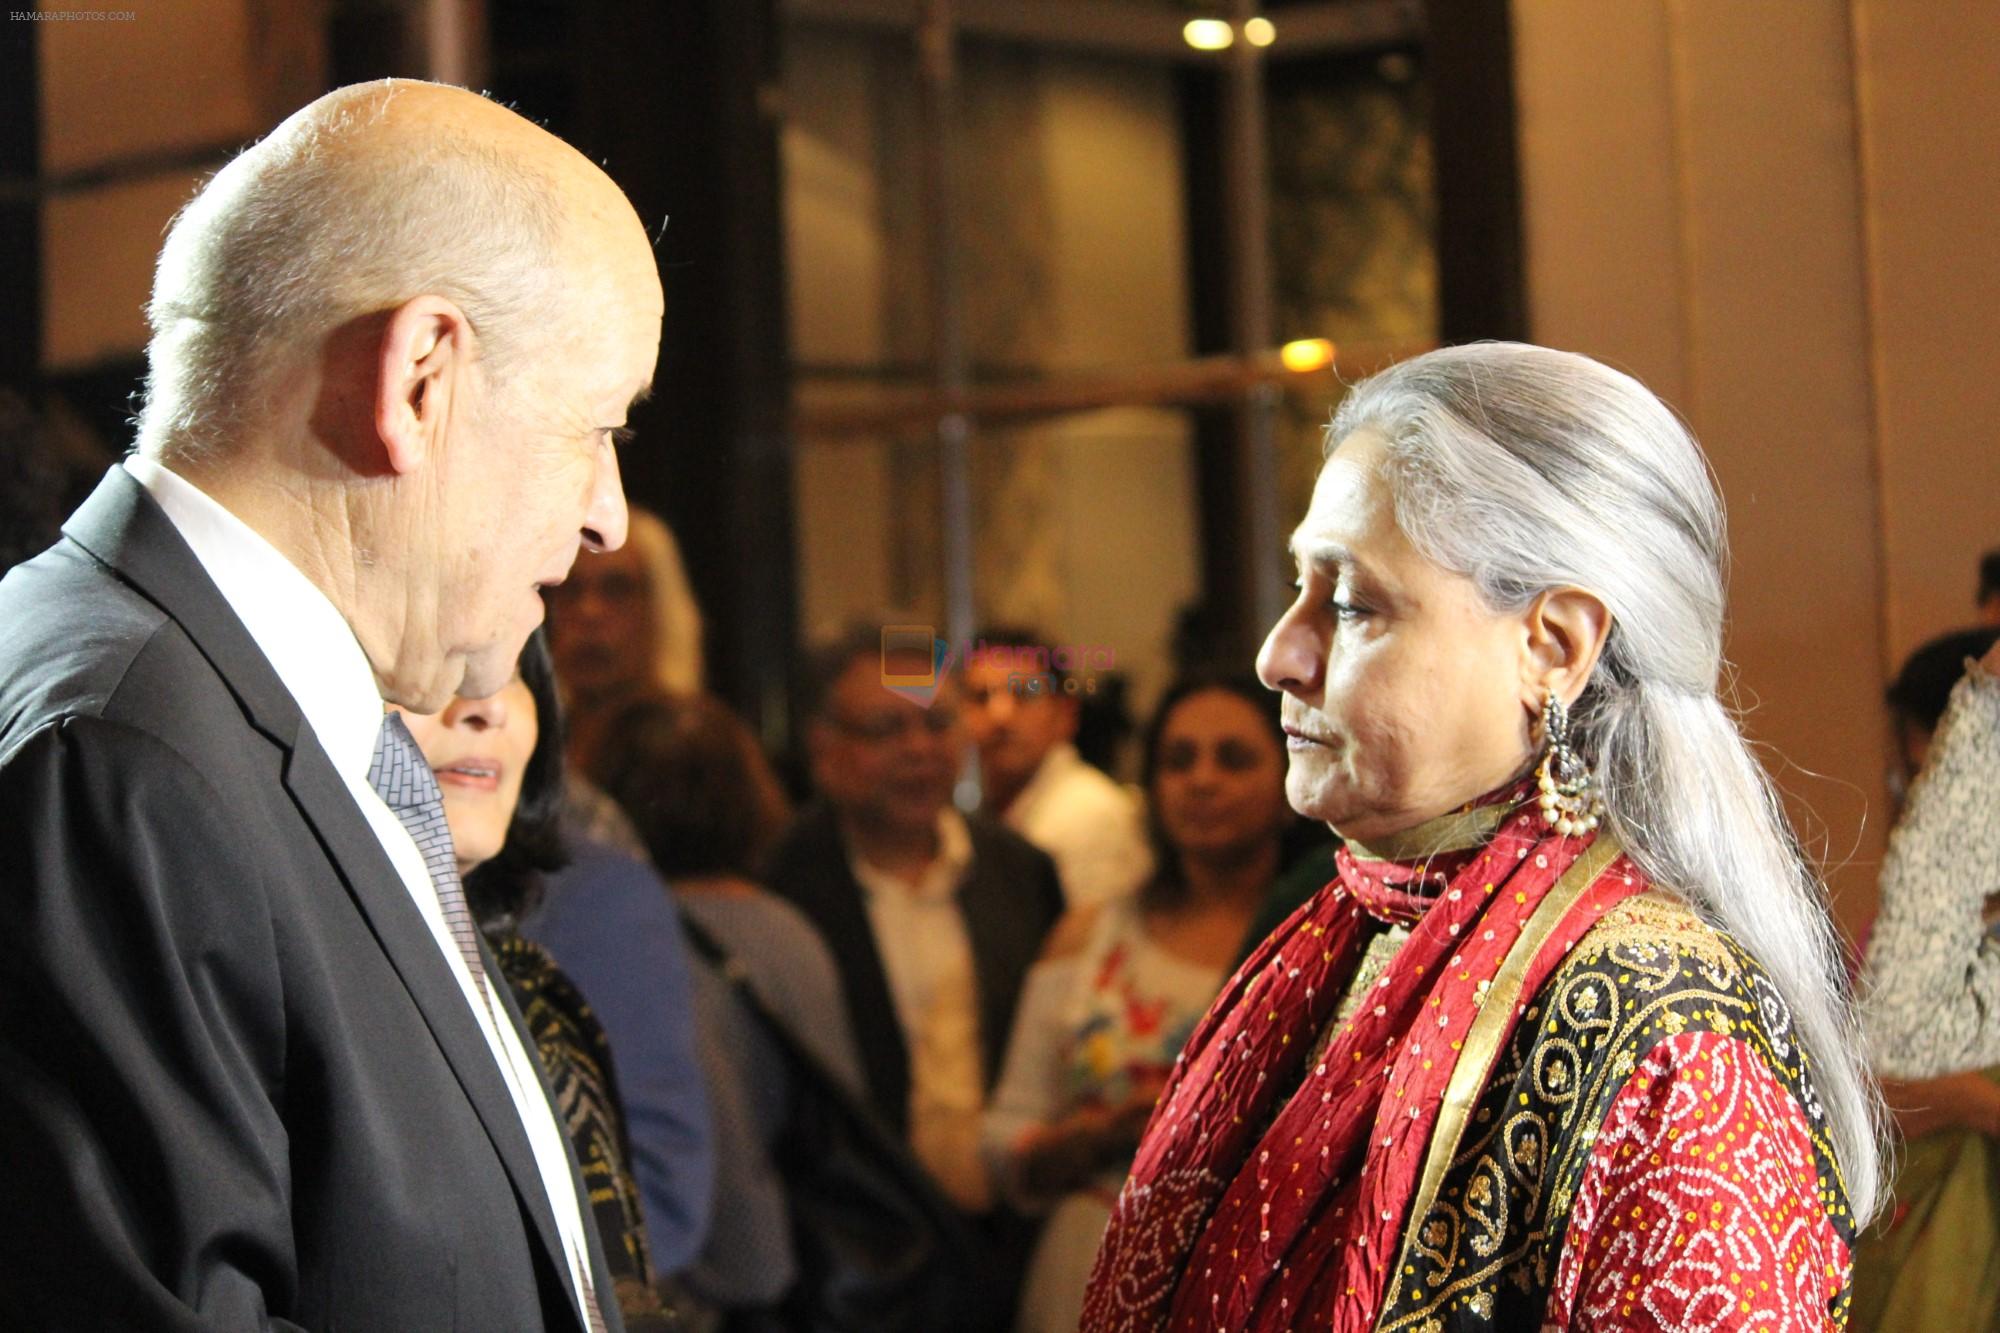 Jaya Bachchan at 2nd Indo-French Meeting Wherin film Industry Culture Exchange Between India on 15th Dec 2018